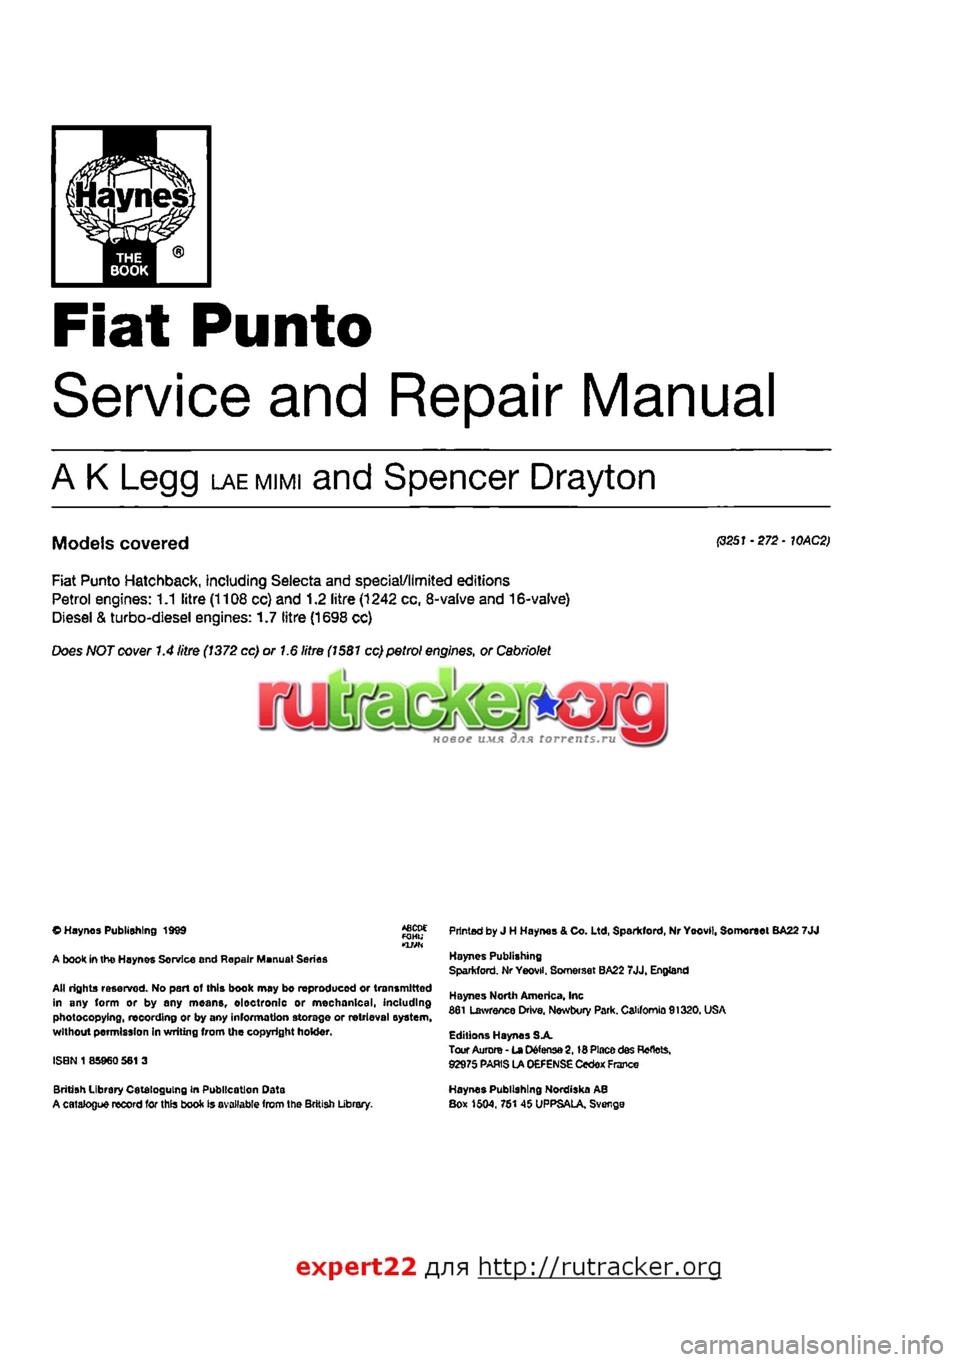 FIAT PUNTO 1996 176 / 1.G Workshop Manual 
Fiat Punto 
Service and Repair Manual 
A K Legg LAEMIMI and Spencer Drayton 
Models covered P251 •272 • WAC2> 
Fiat Punto Hatchback, including Selecta and special/limited editions Petrol engines: